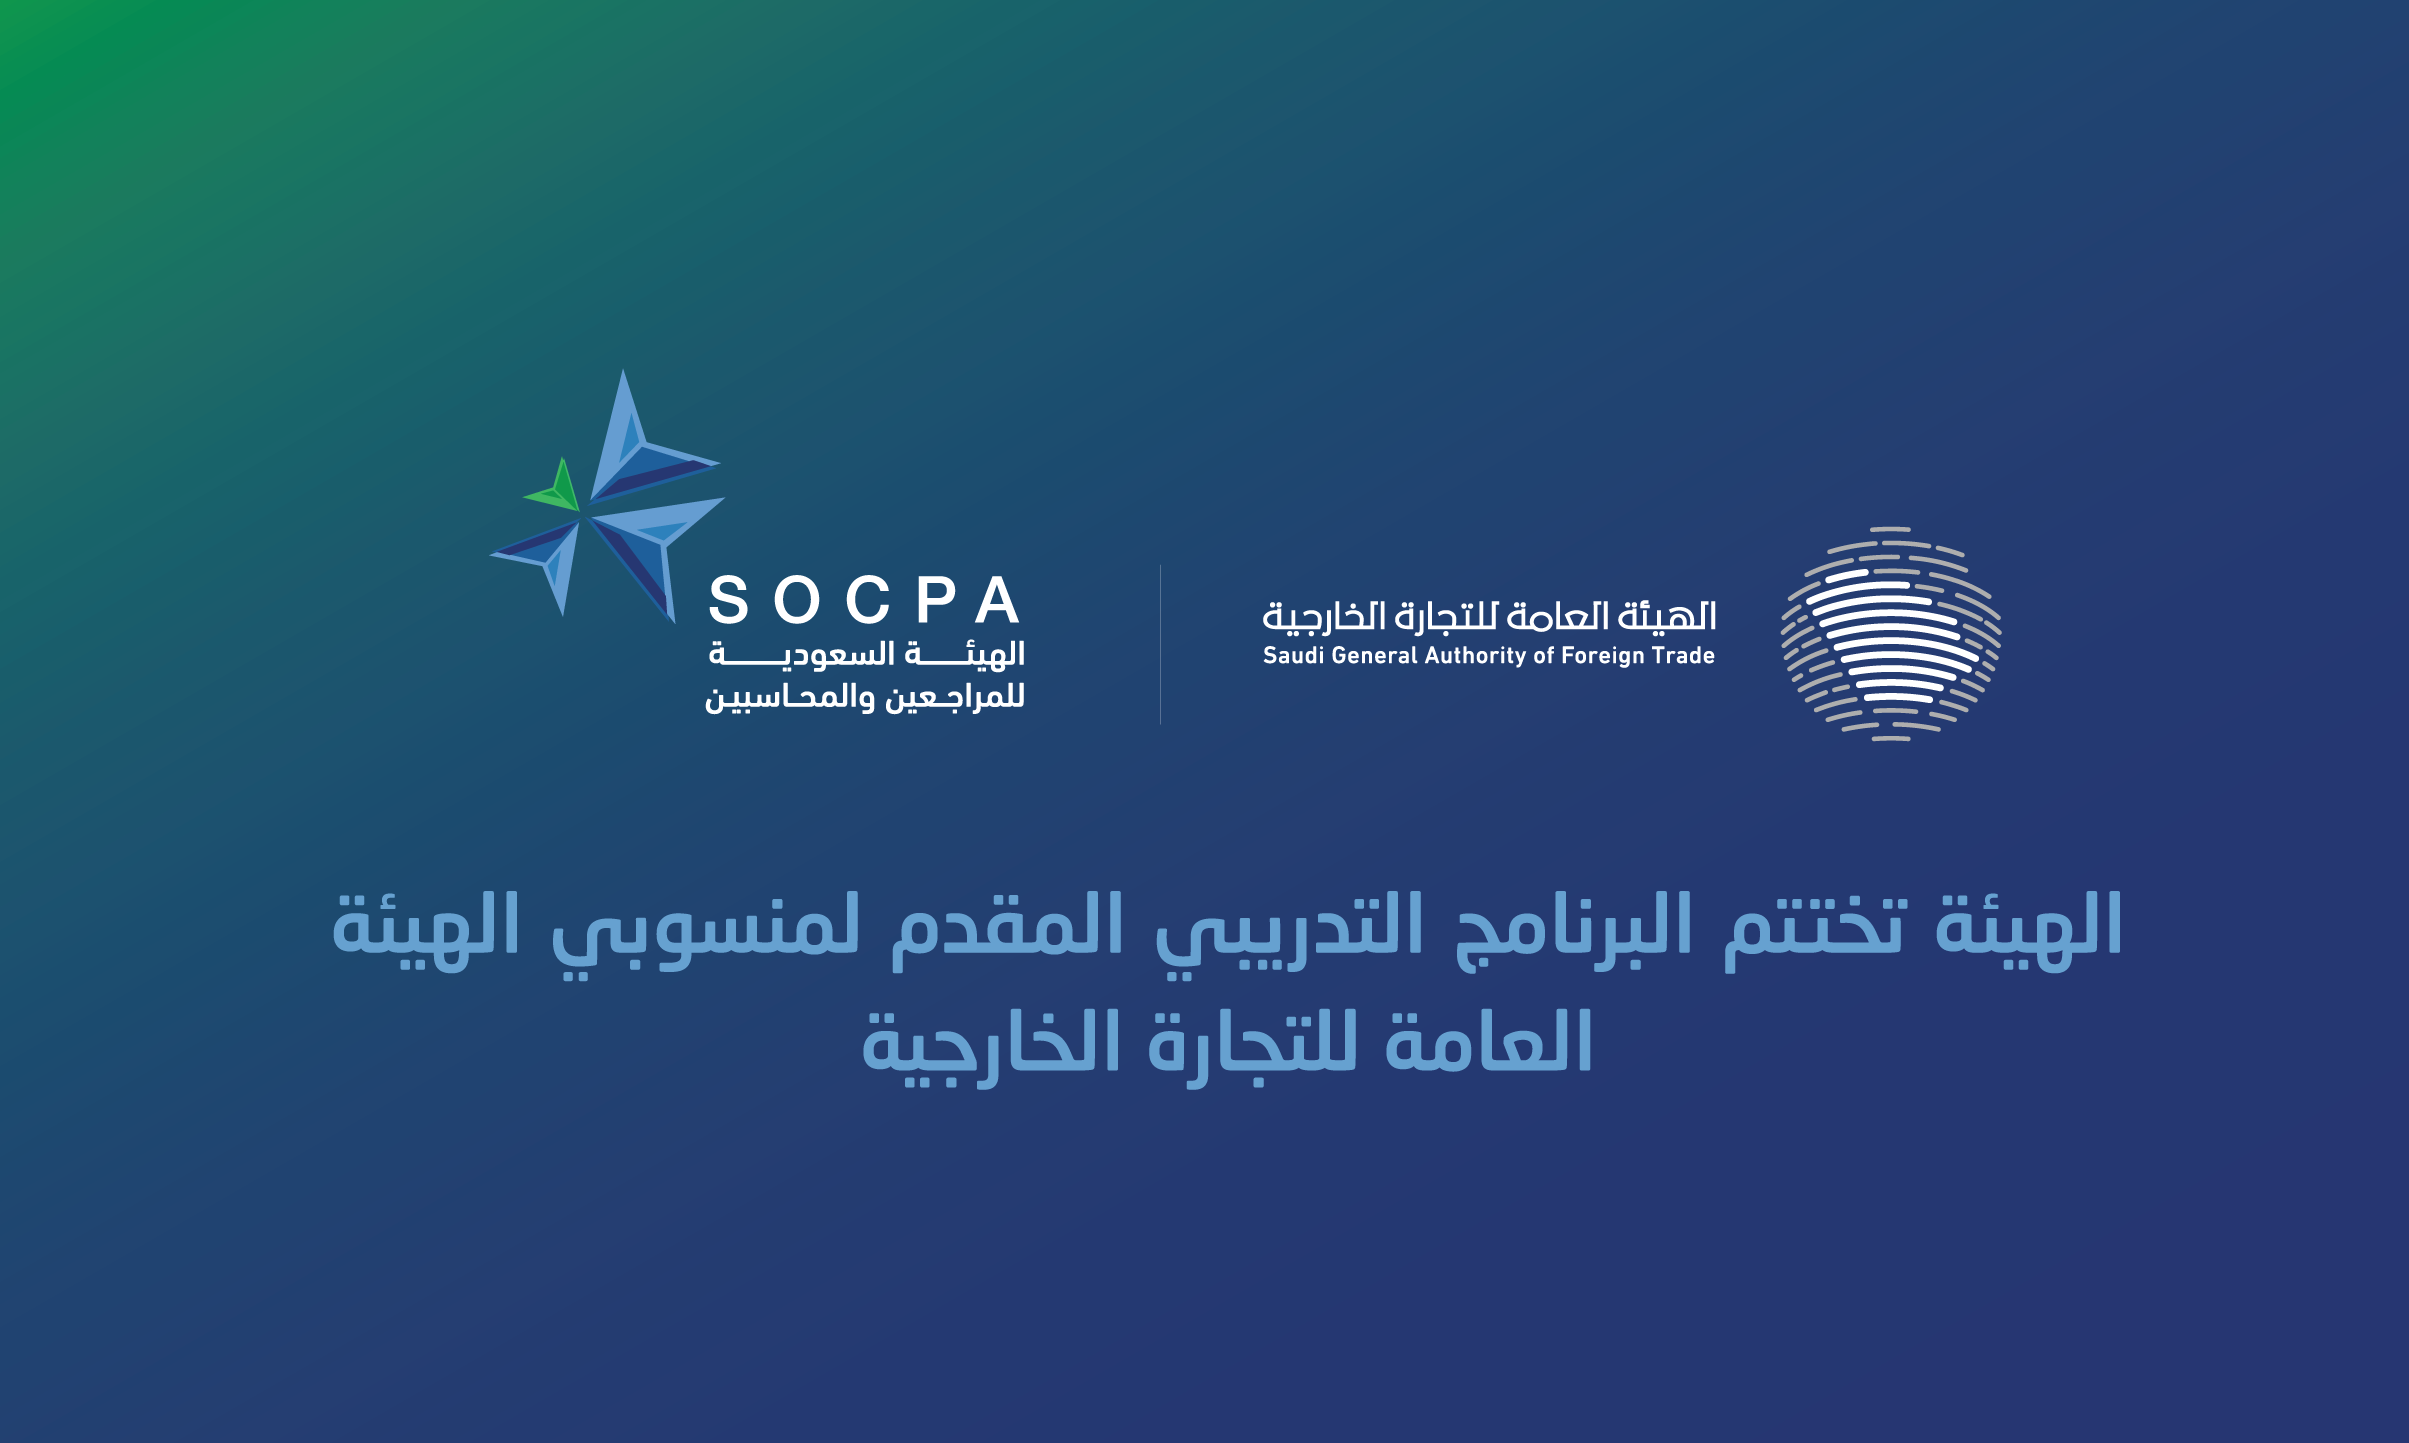 SOCPA Completes a Training Program Provided for the Saudi General Authority for Foreign Trade Employees